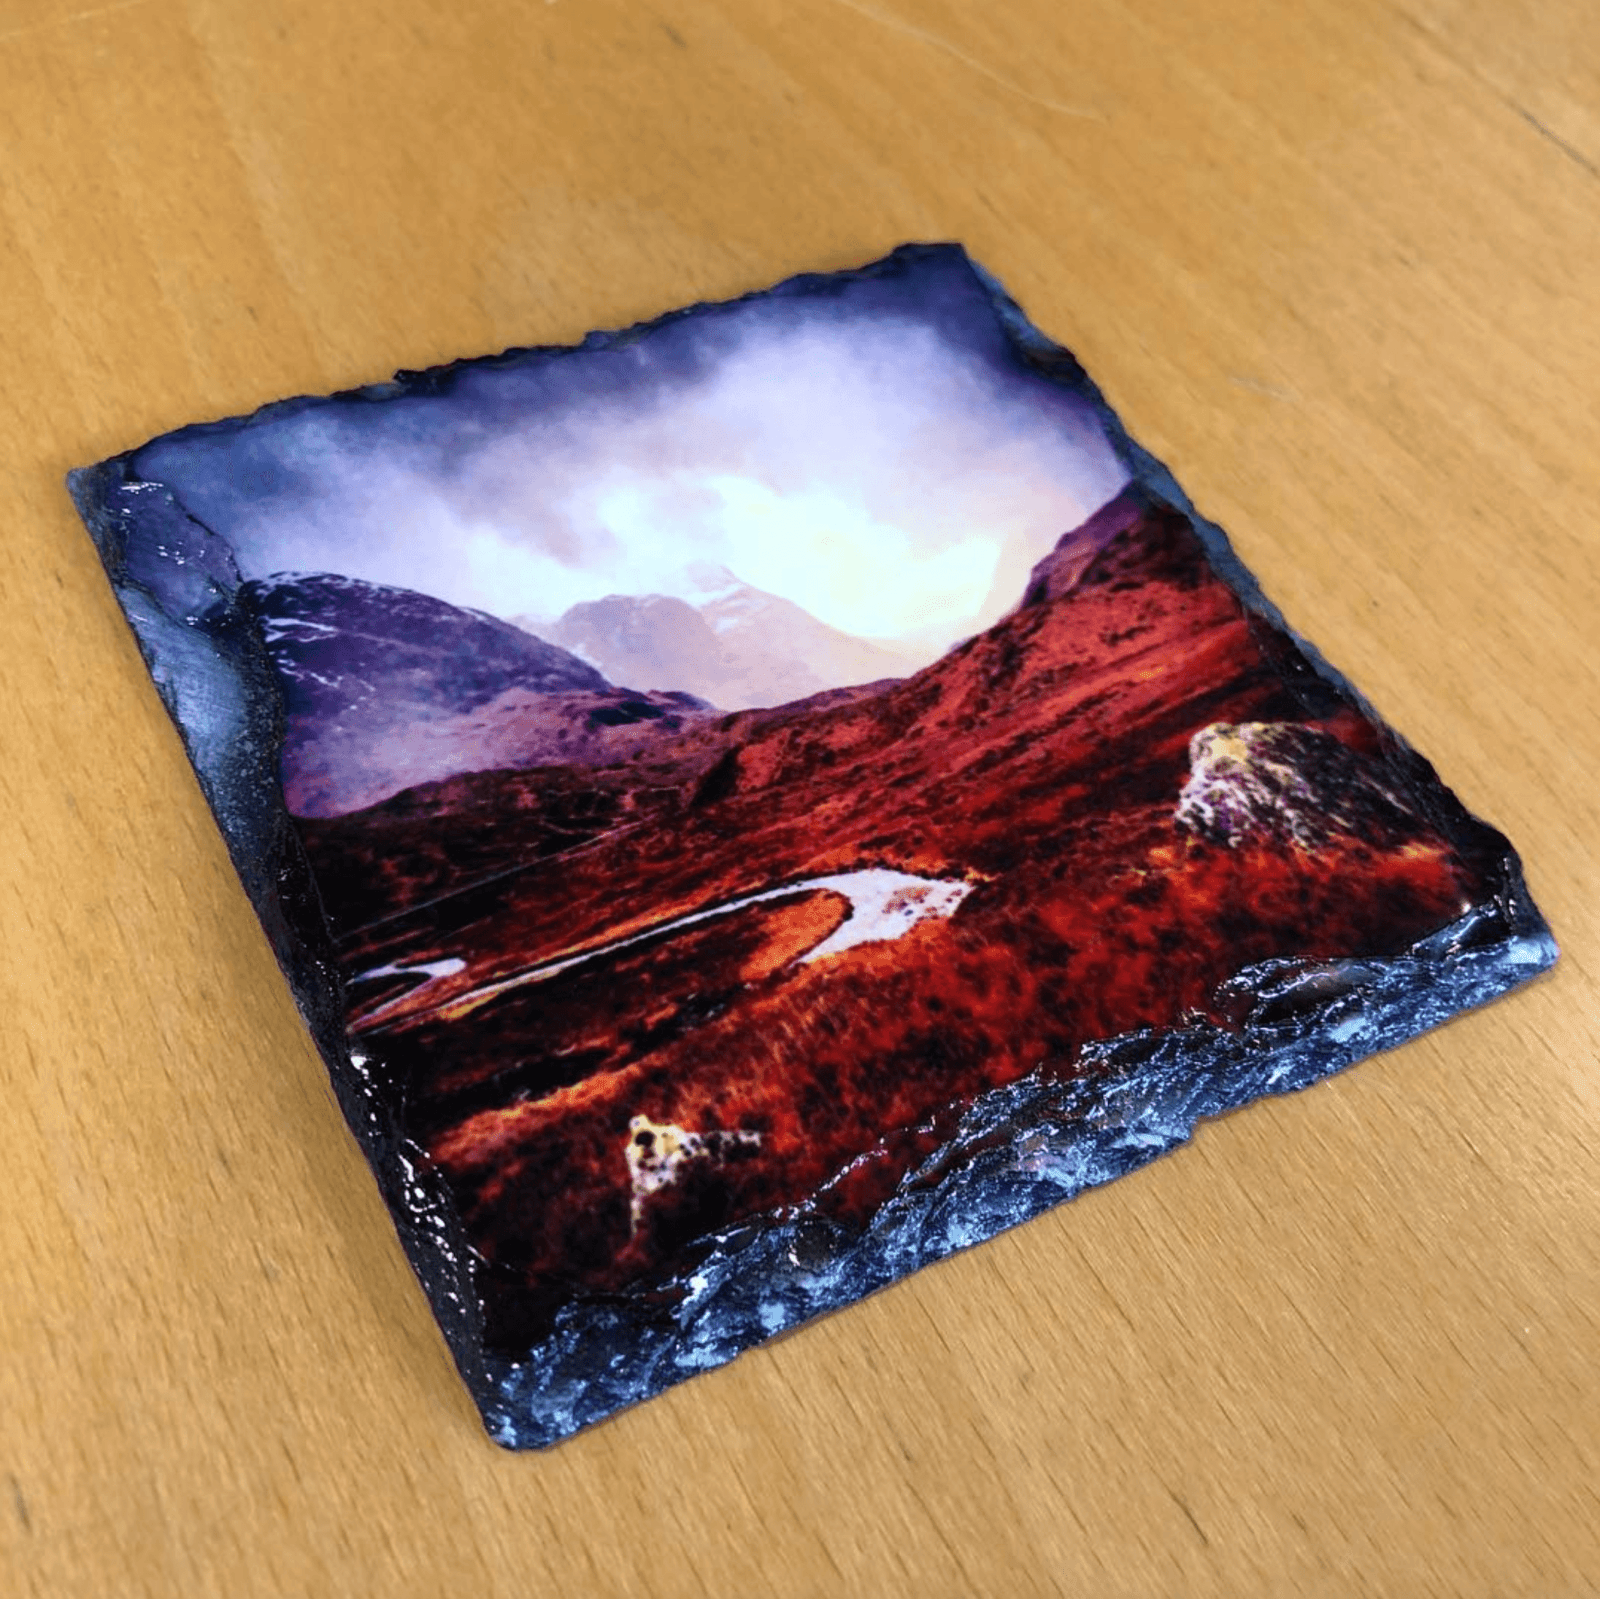 River Clyde Twilight Slate Art-Slate Art-River Clyde Art Gallery-Paintings, Prints, Homeware, Art Gifts From Scotland By Scottish Artist Kevin Hunter